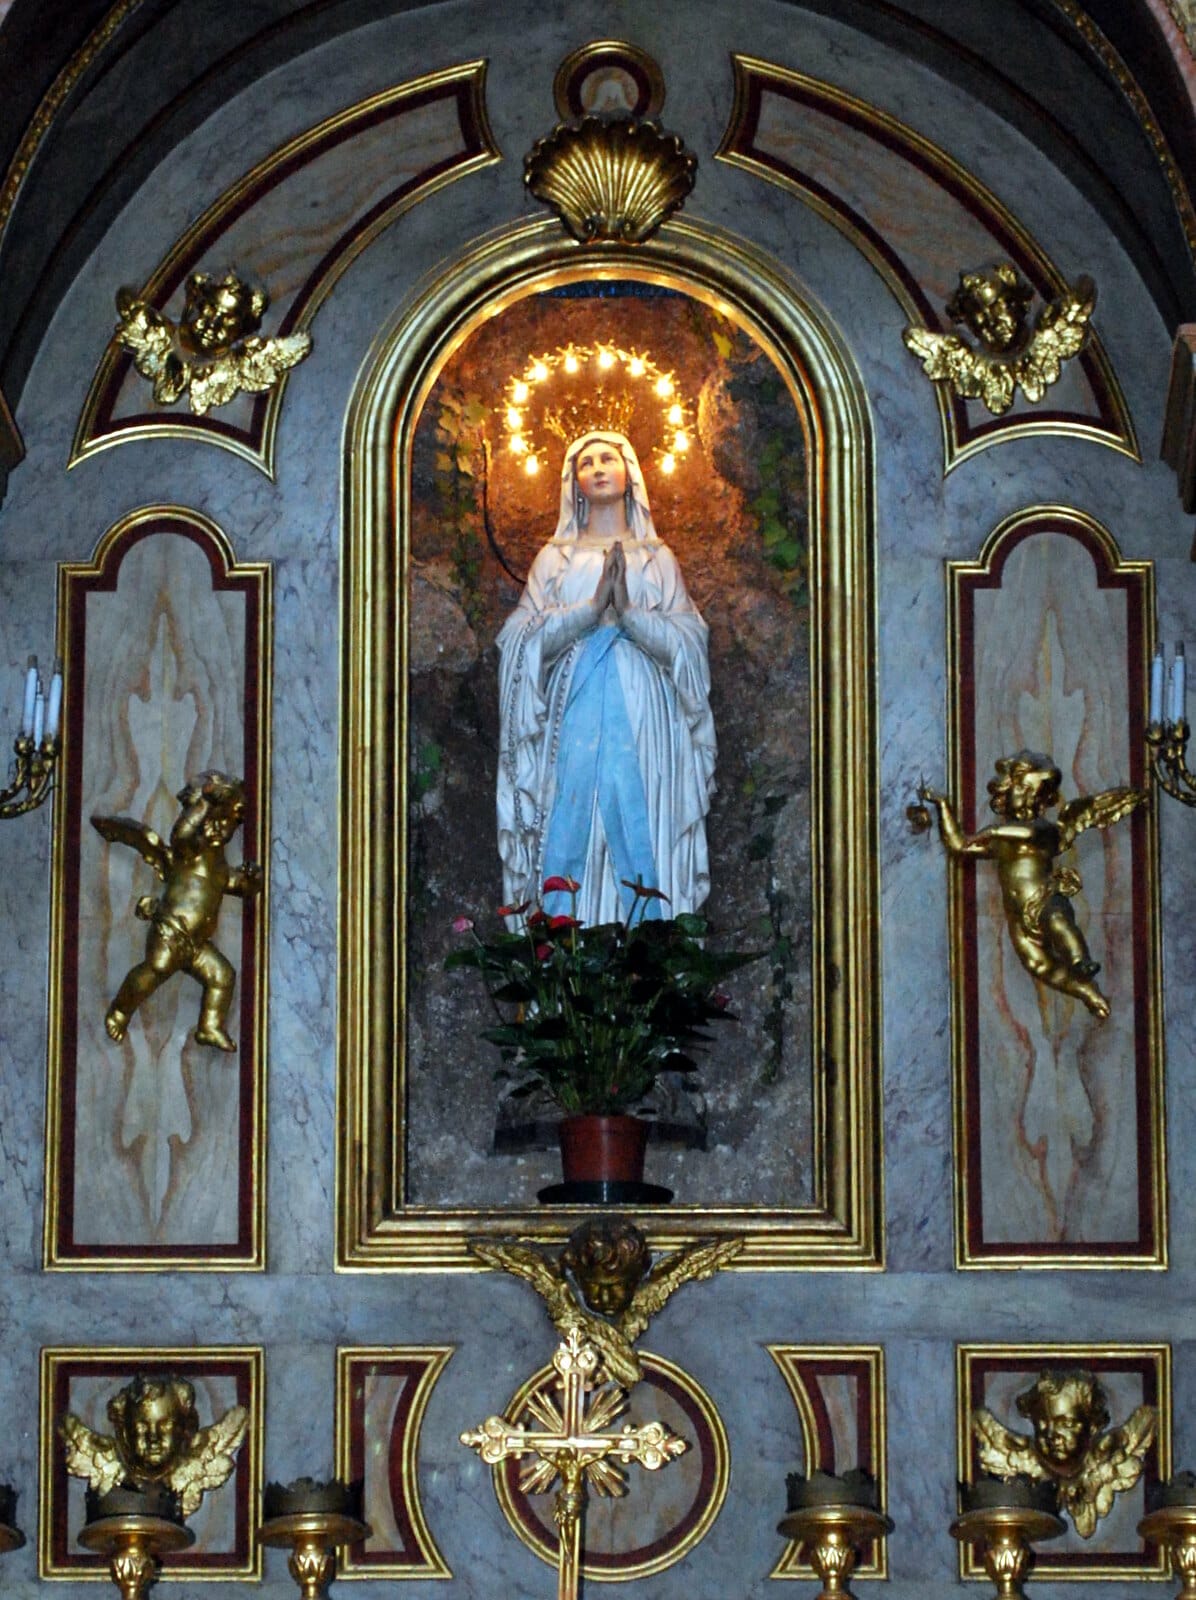 A statue of Mary praying inside of a church